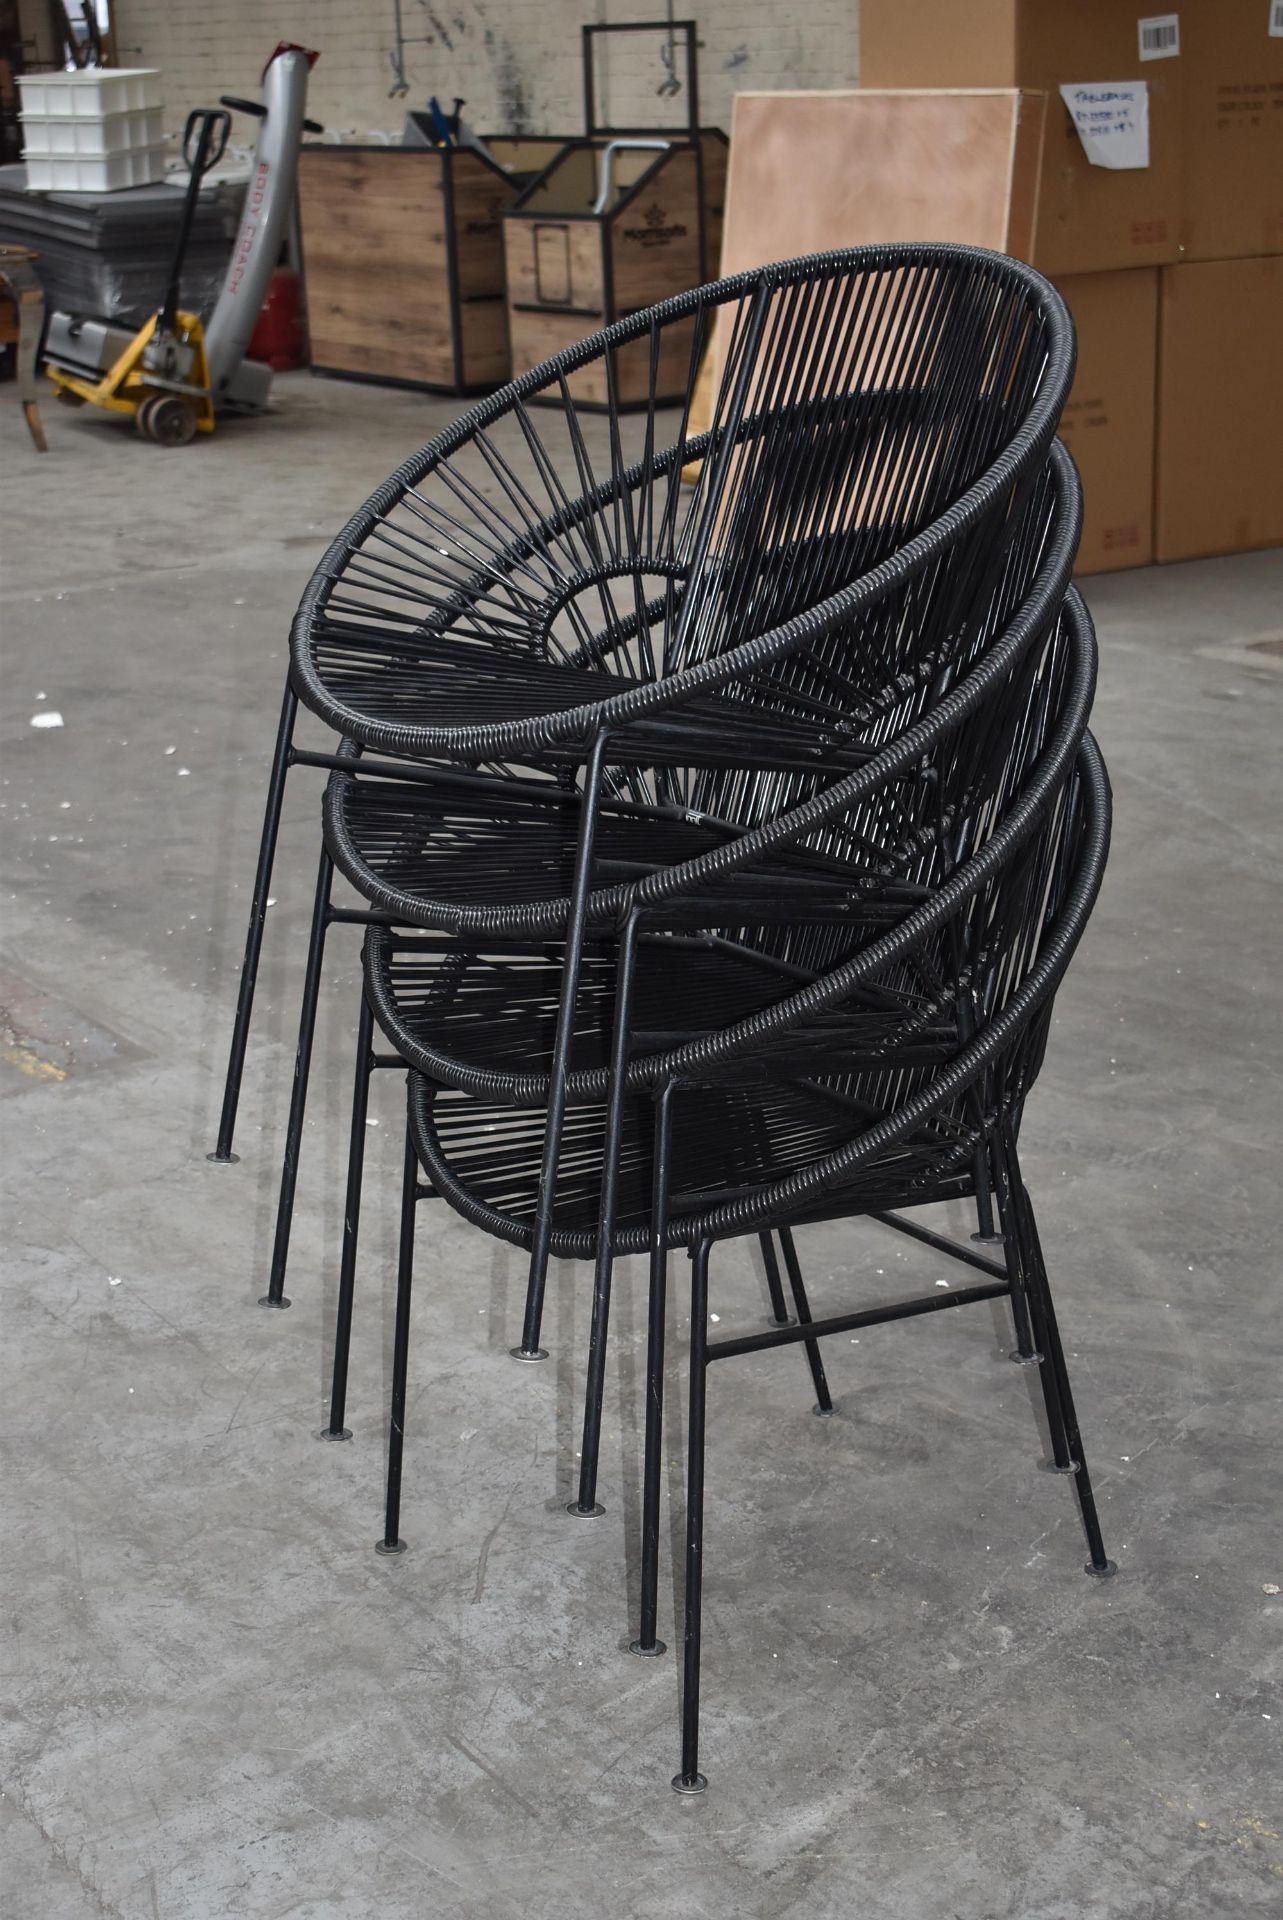 4 x Innit Designer Chairs - Acapulco Style Chairs in Black Suitable For Indoor or Outdoor Use - - Image 8 of 11